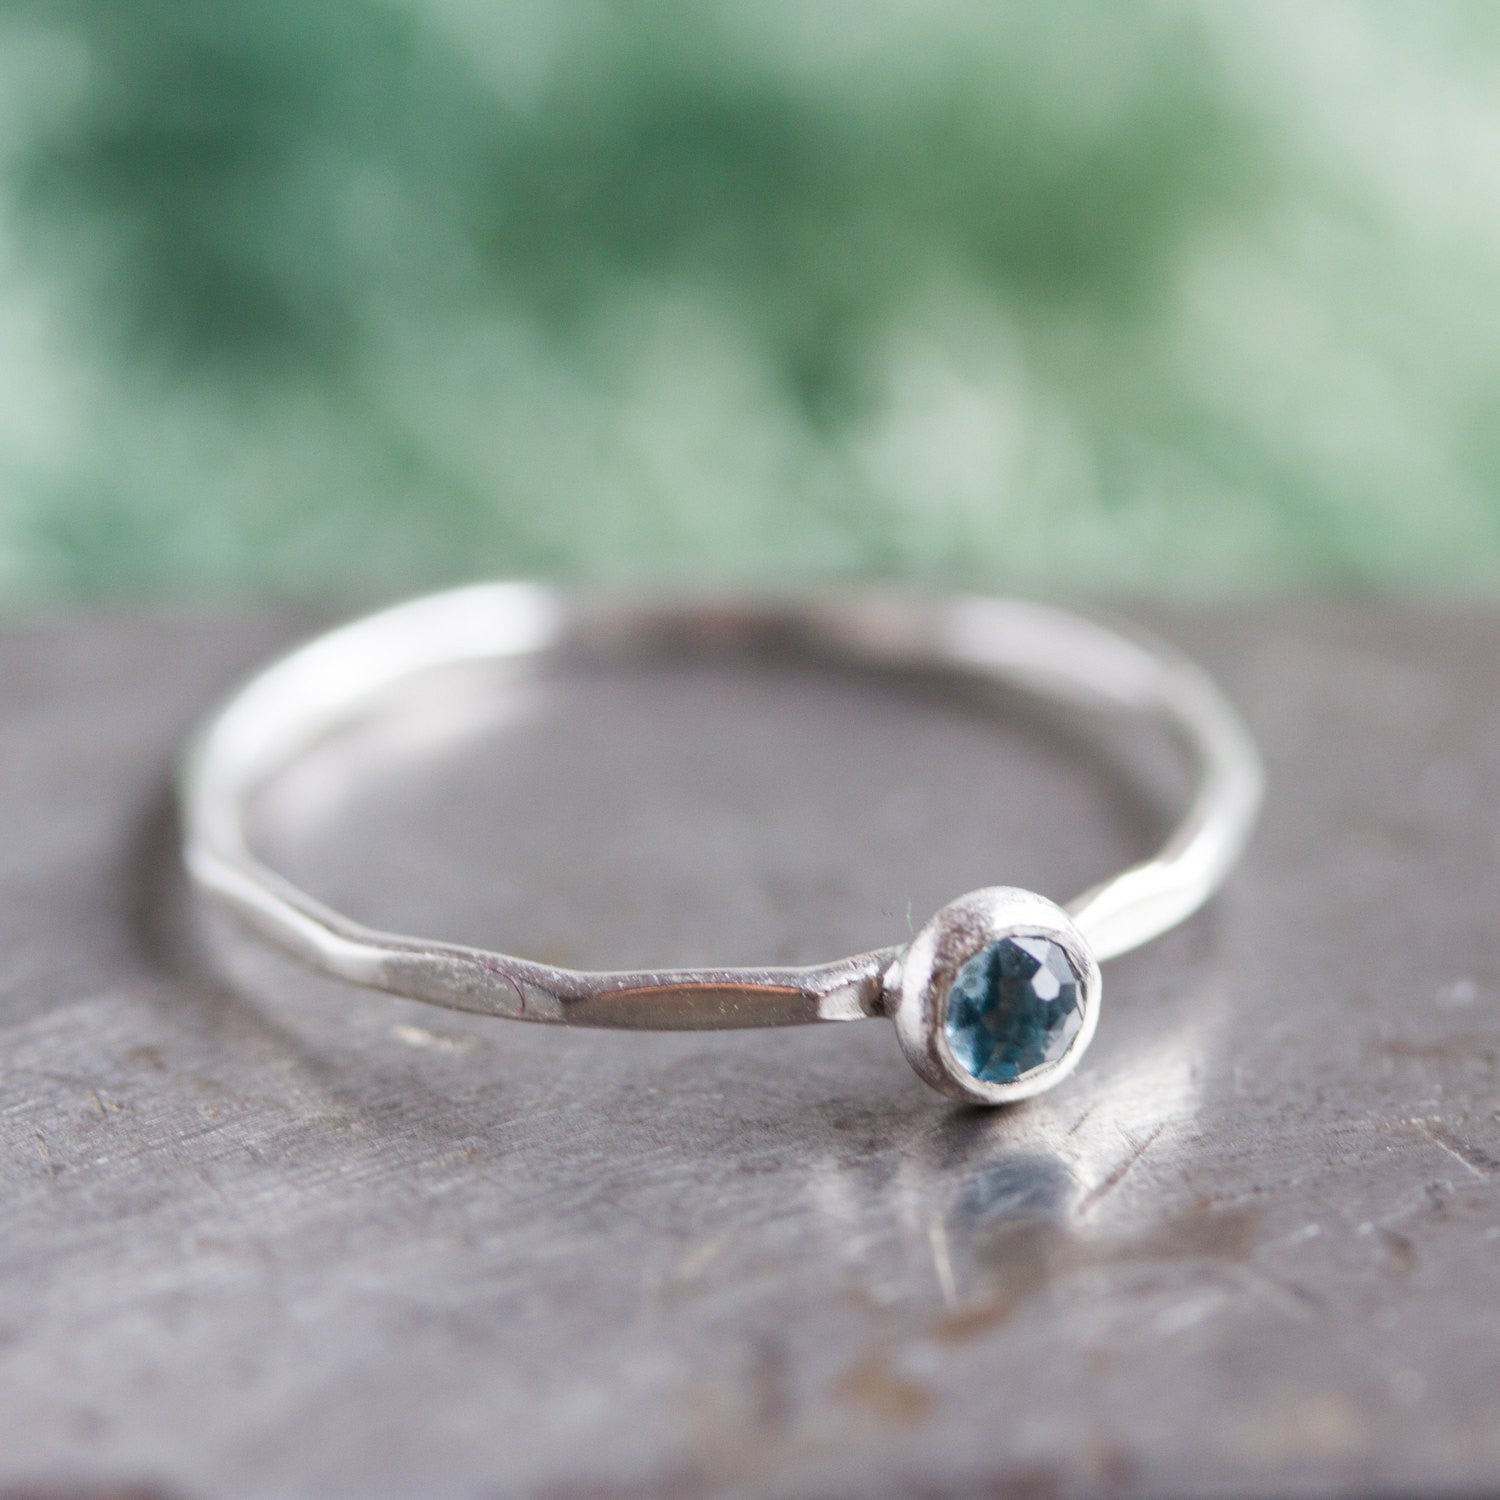 London Blue Topaz - skinny stackable ring with rose cut London Blue To ...